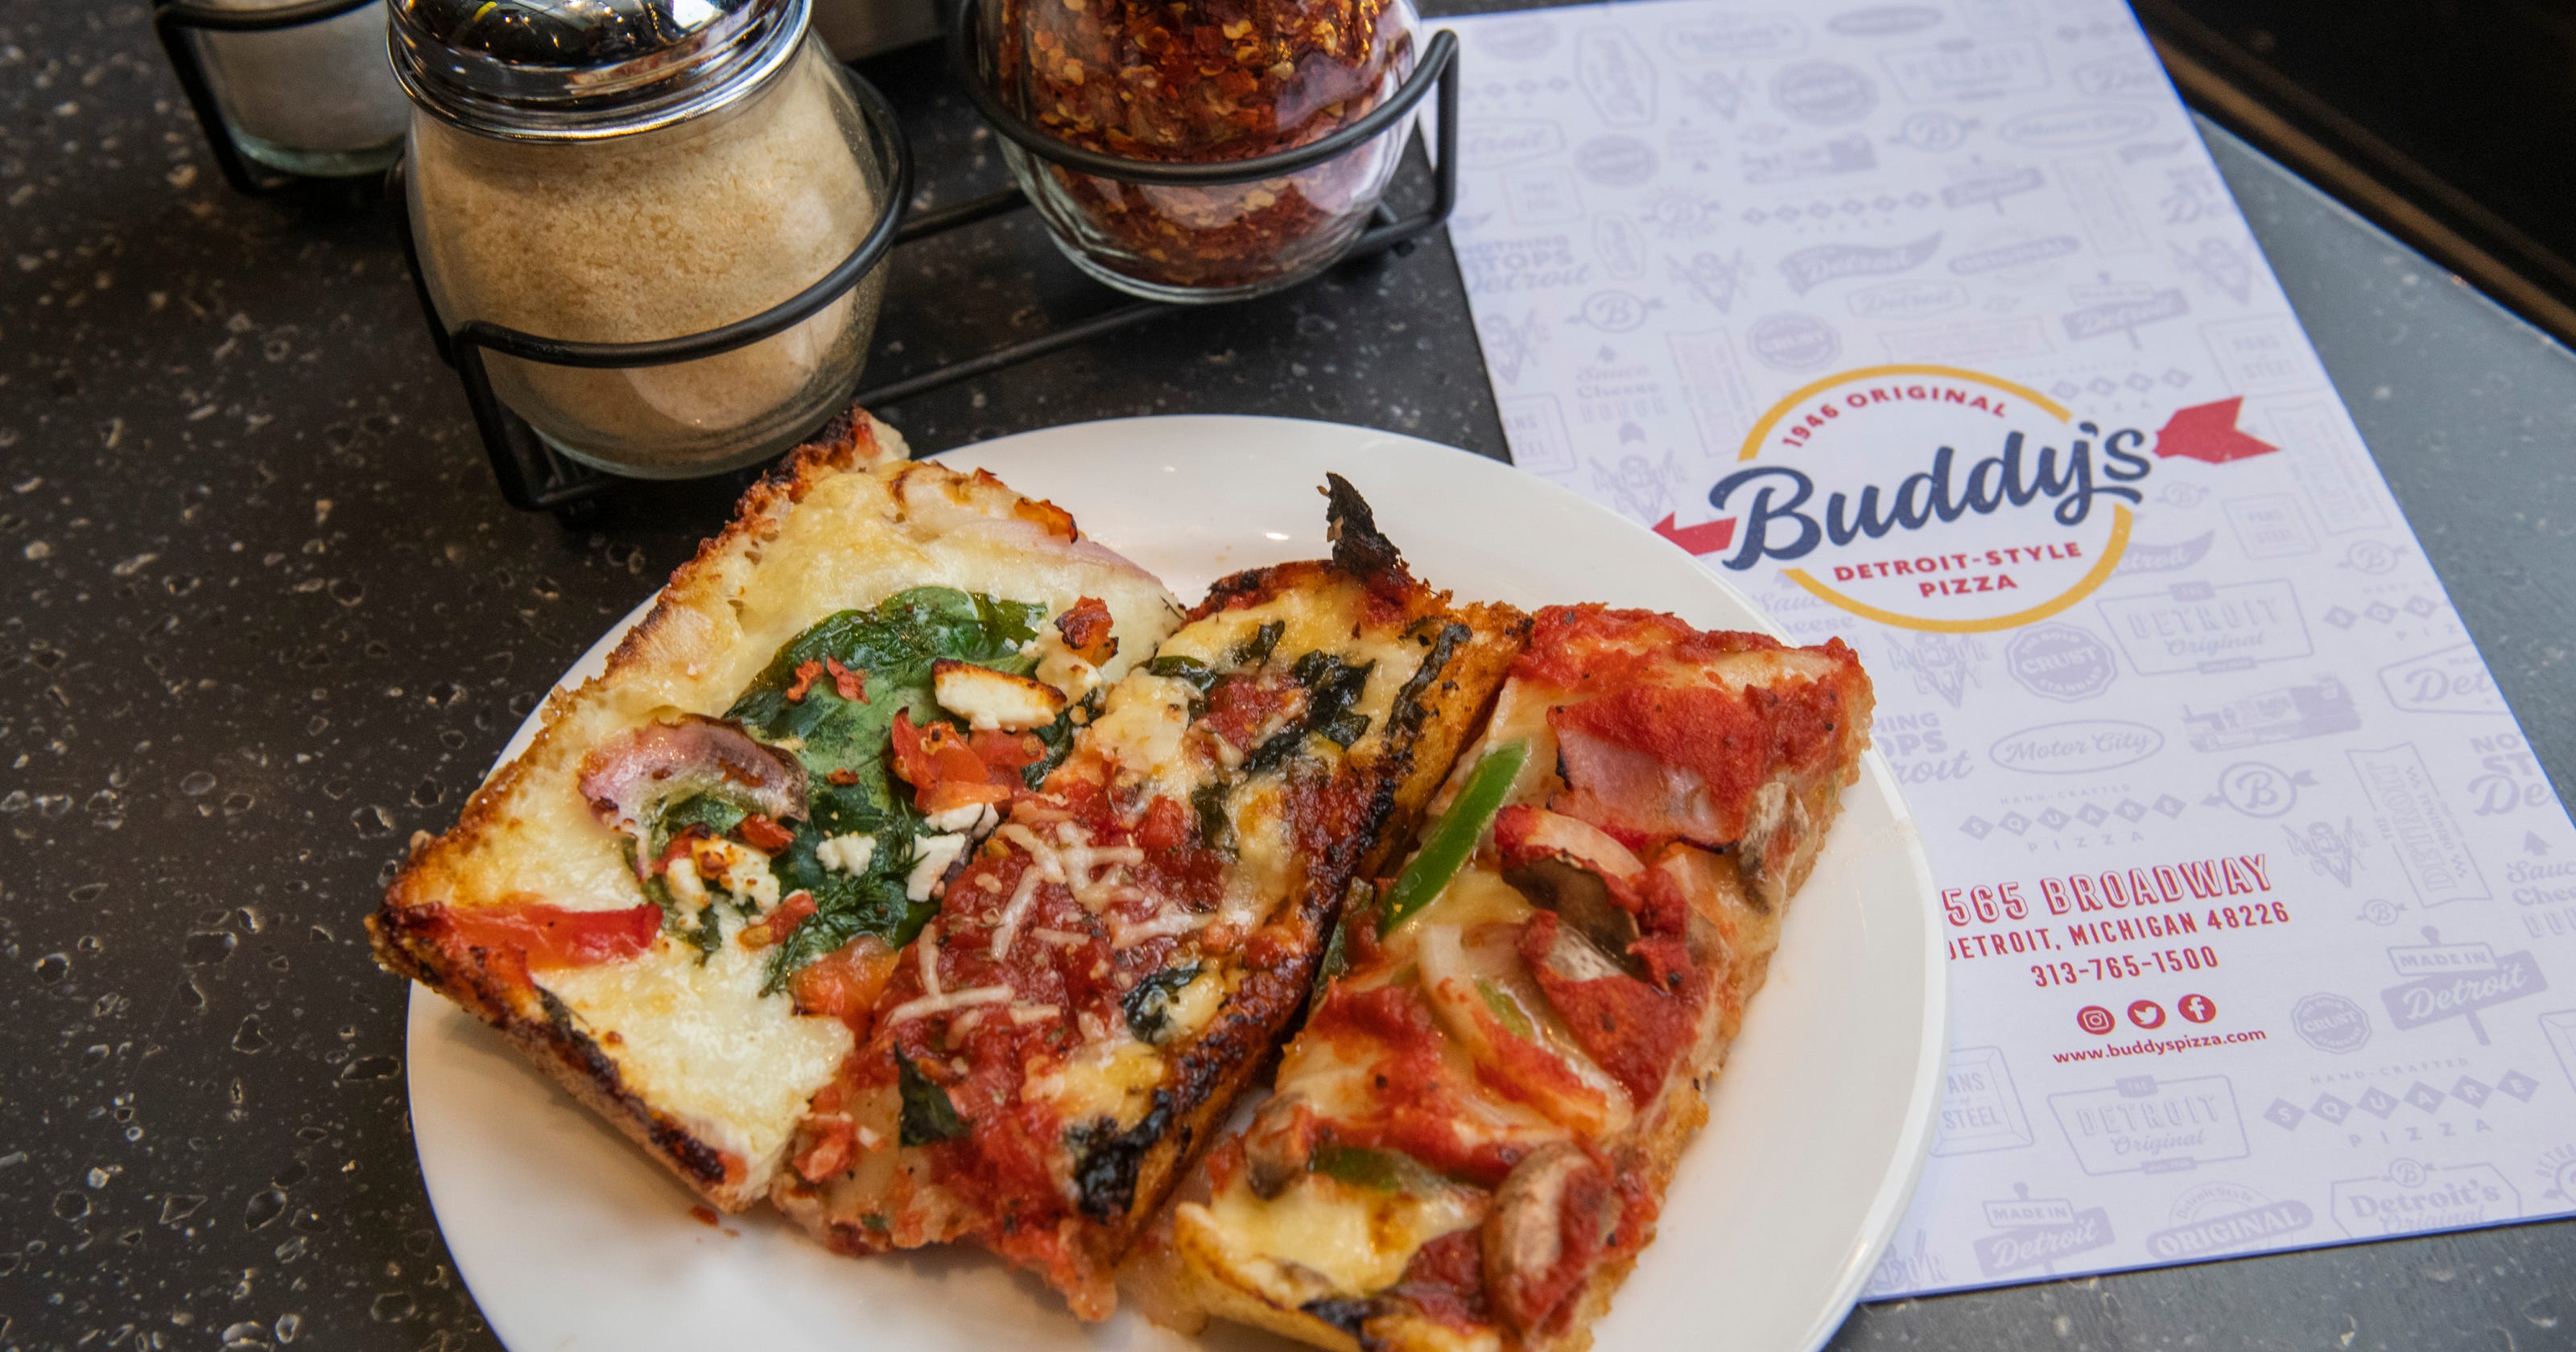 Buddy's Pizza to open downtown restaurant Wednesday